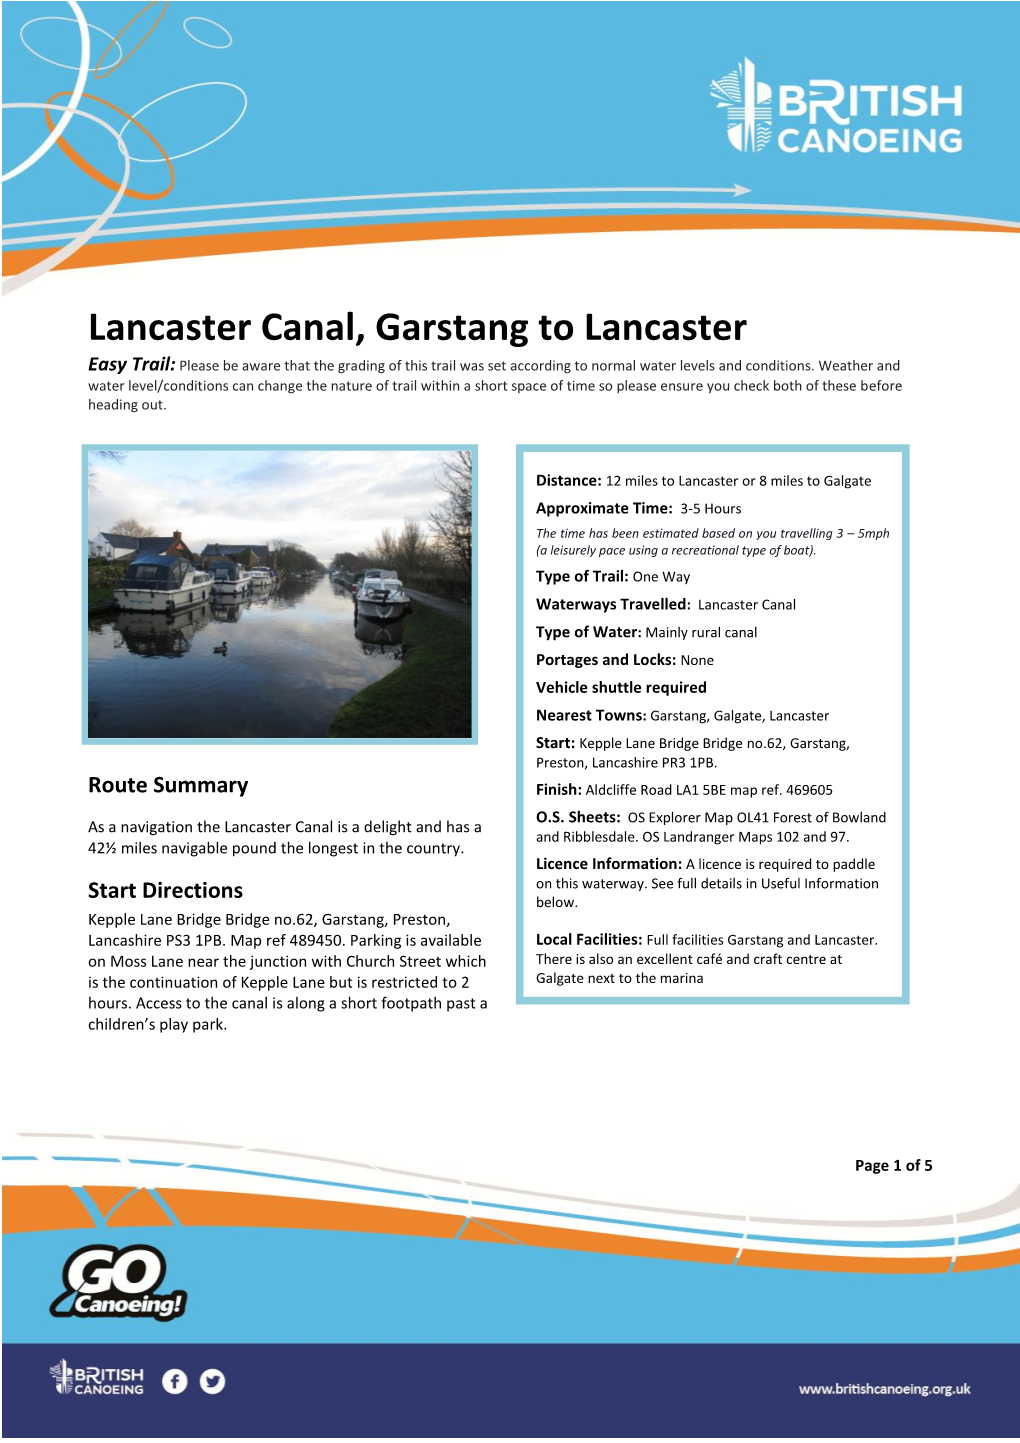 Lancaster Canal, Garstang to Lancaster Easy Trail: Please Be Aware That the Grading of This Trail Was Set According to Normal Water Levels and Conditions